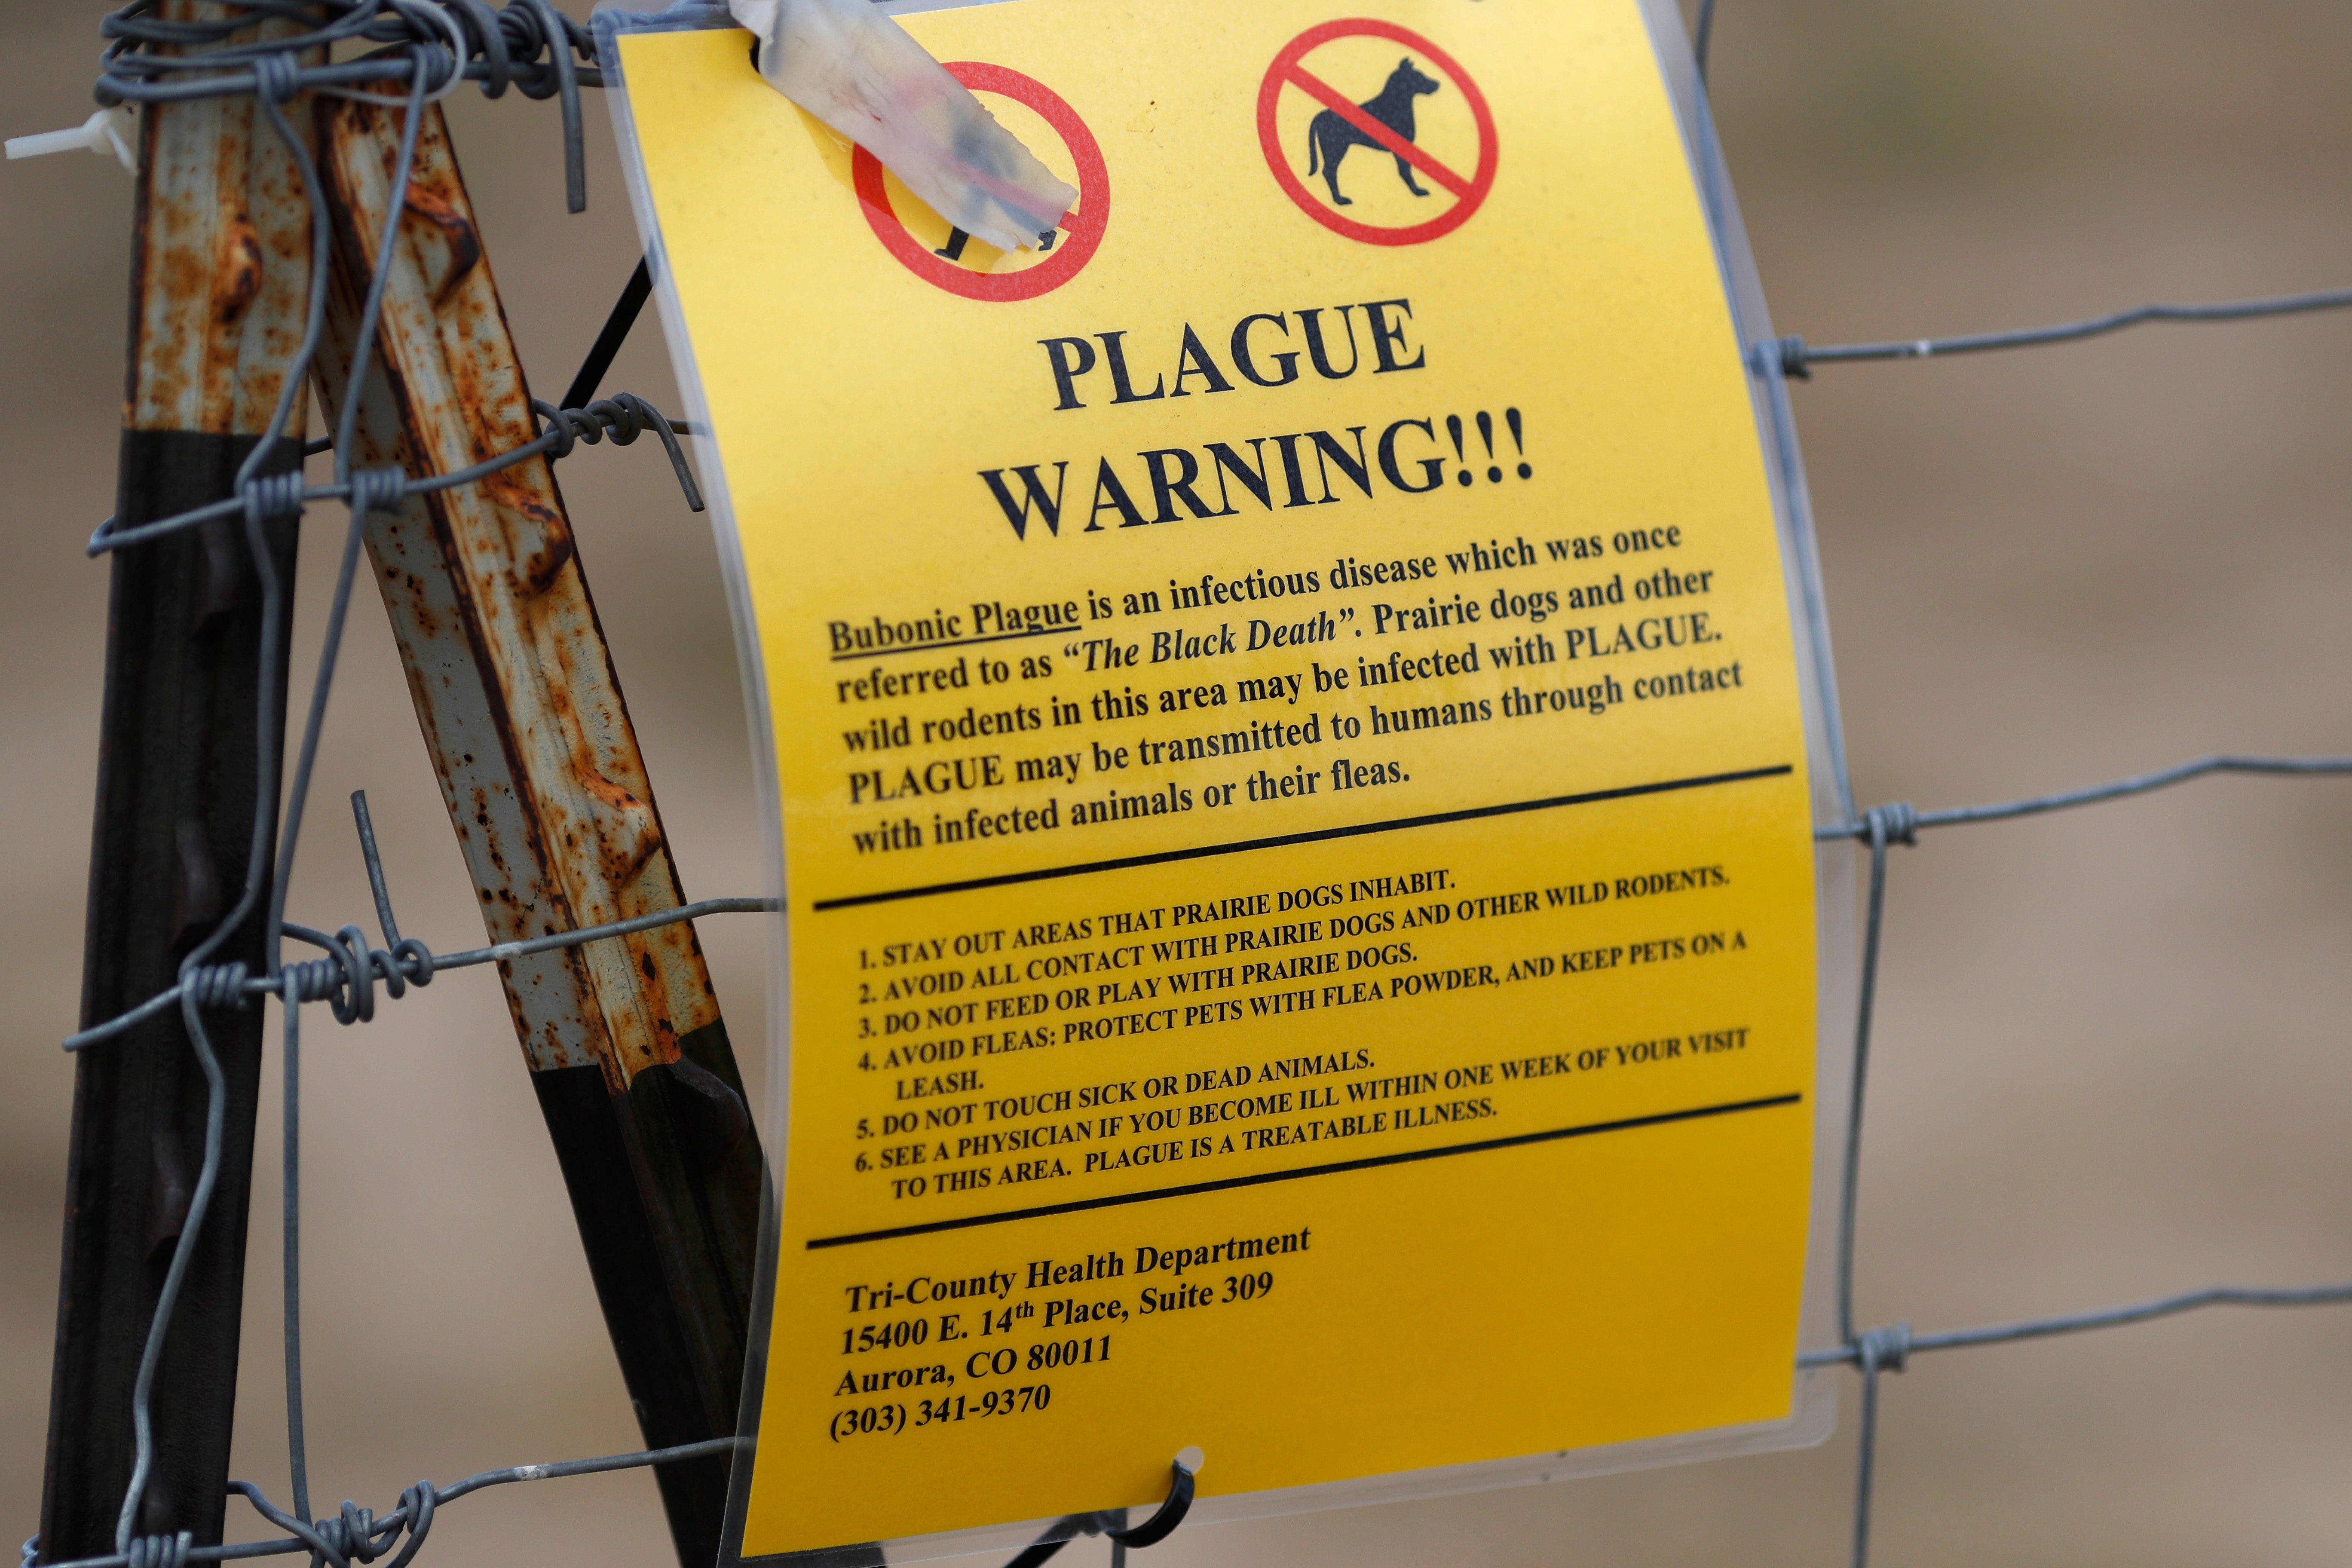 A bubonic plague warning sign is displayed at a parking lot near the Rocky Mountain Arsenal Wildlife Refuge.